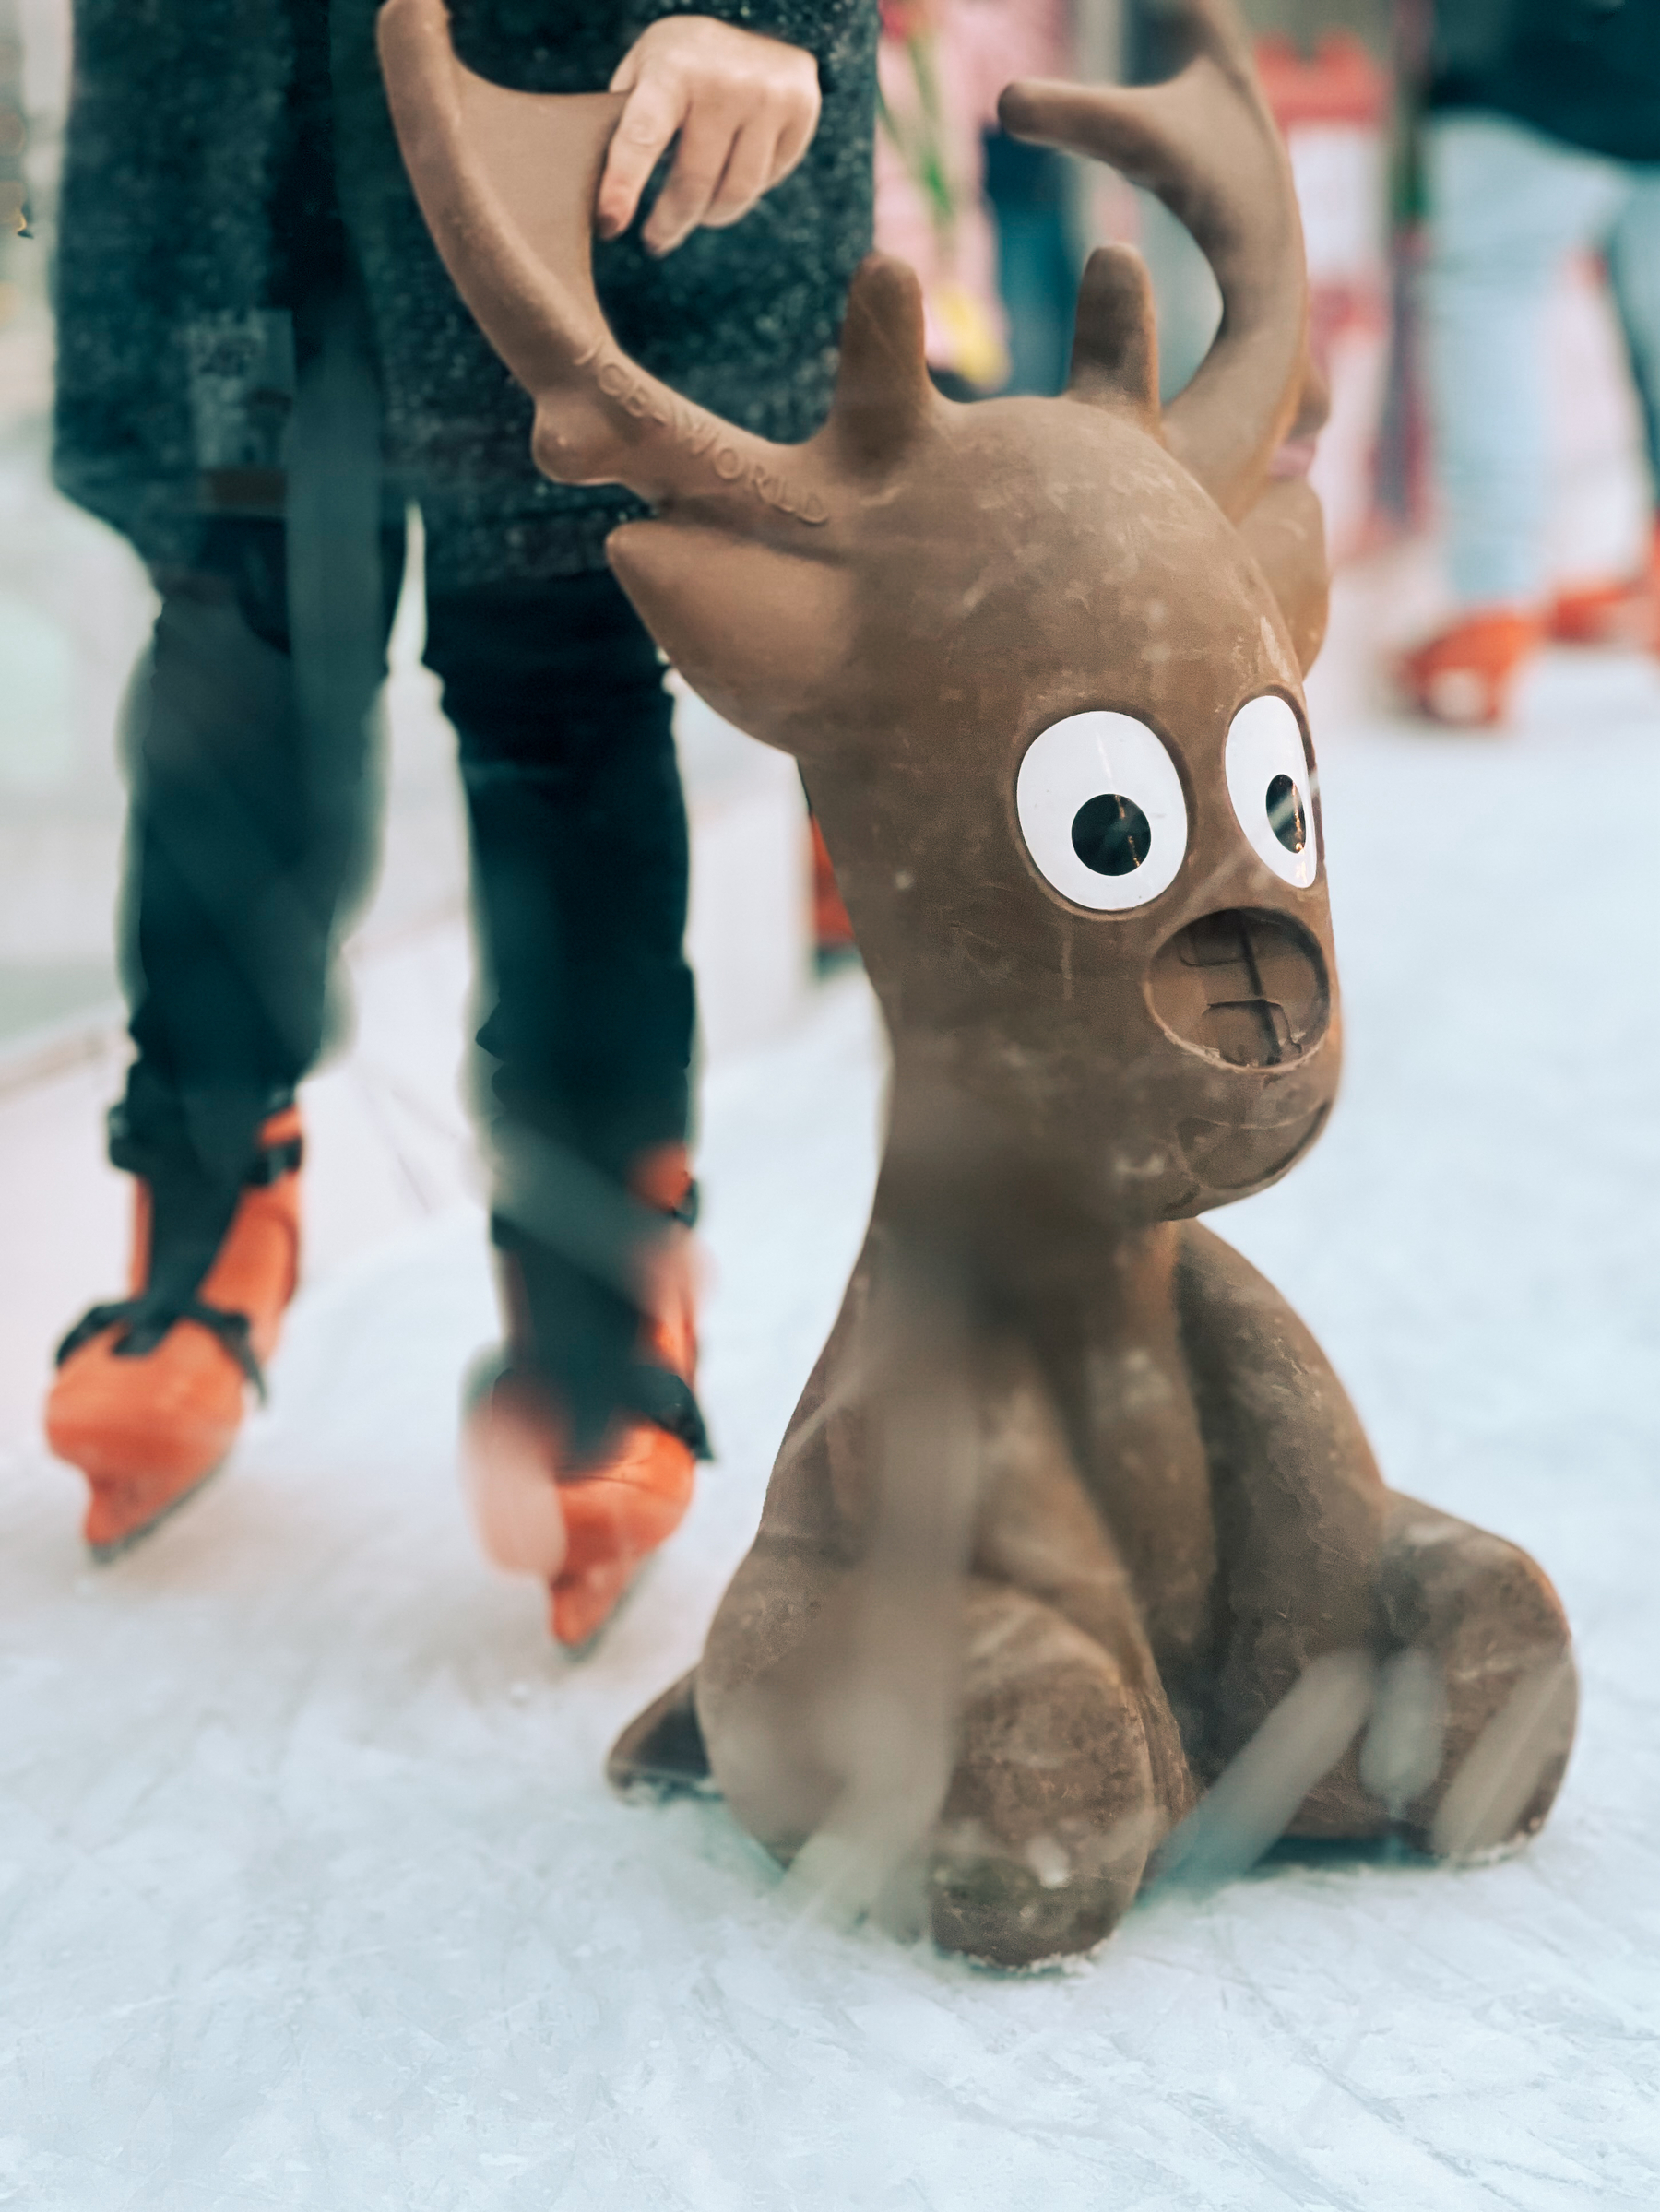 A plastic reindeer skating aid on an ice rink with a blurry figure of a person in ice skates standing behind it.